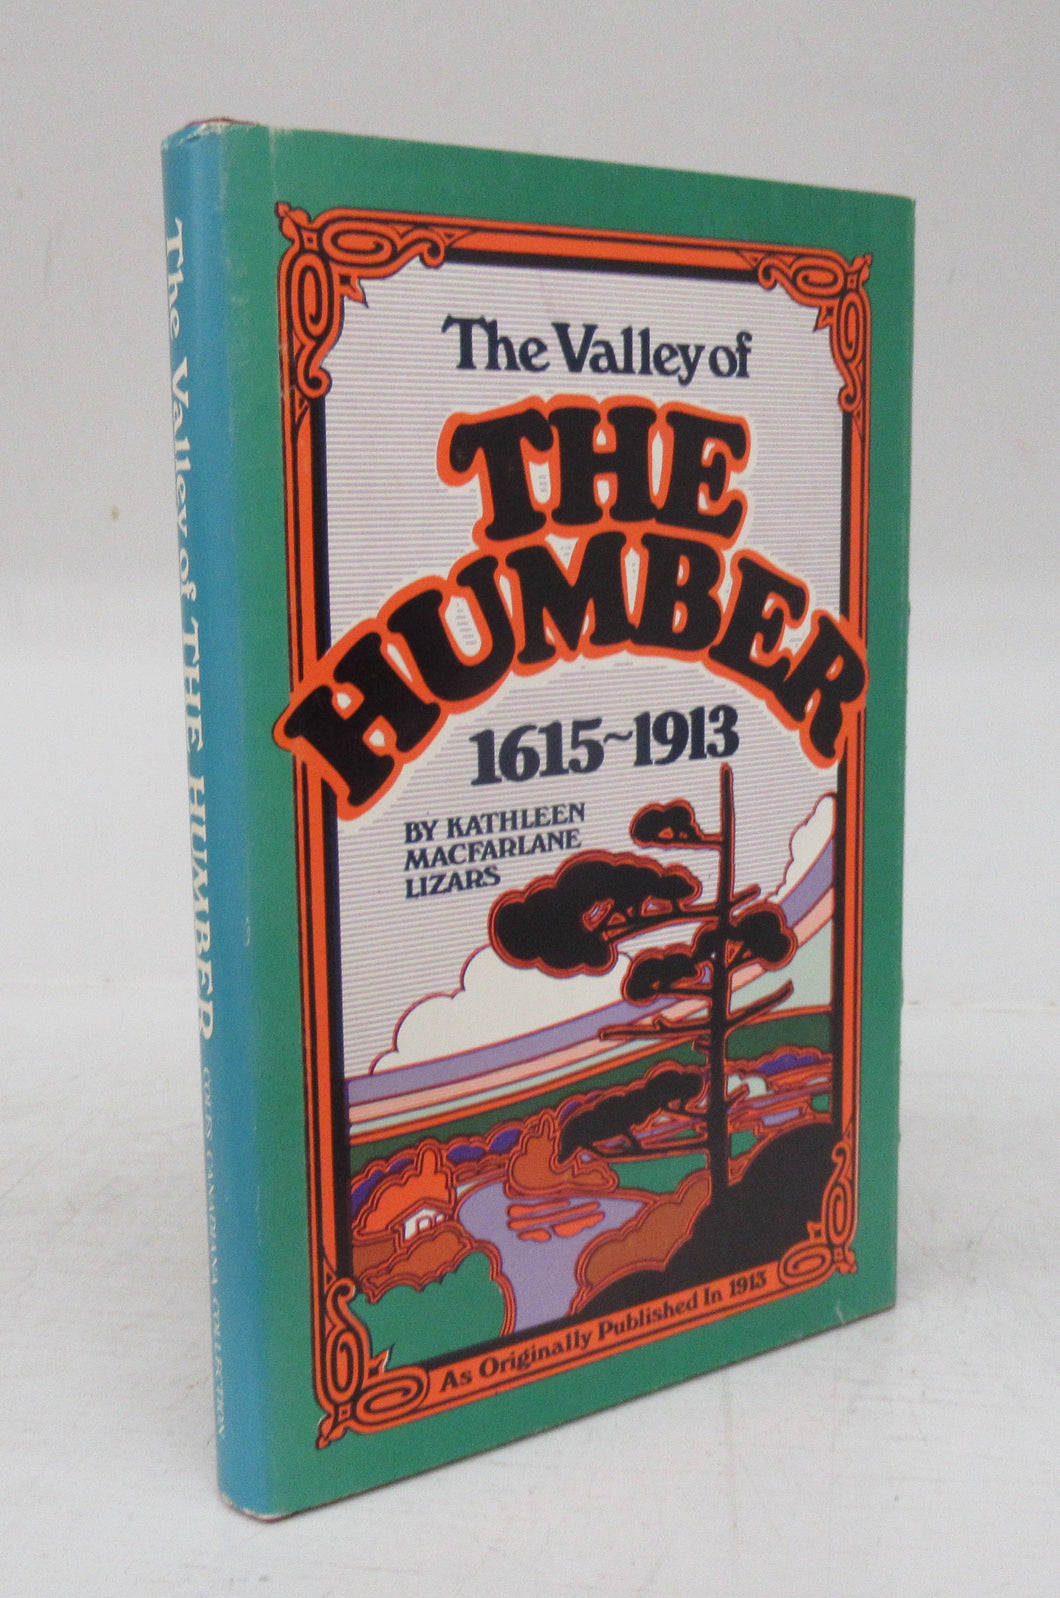 The Valley of the Humber 1615-1913